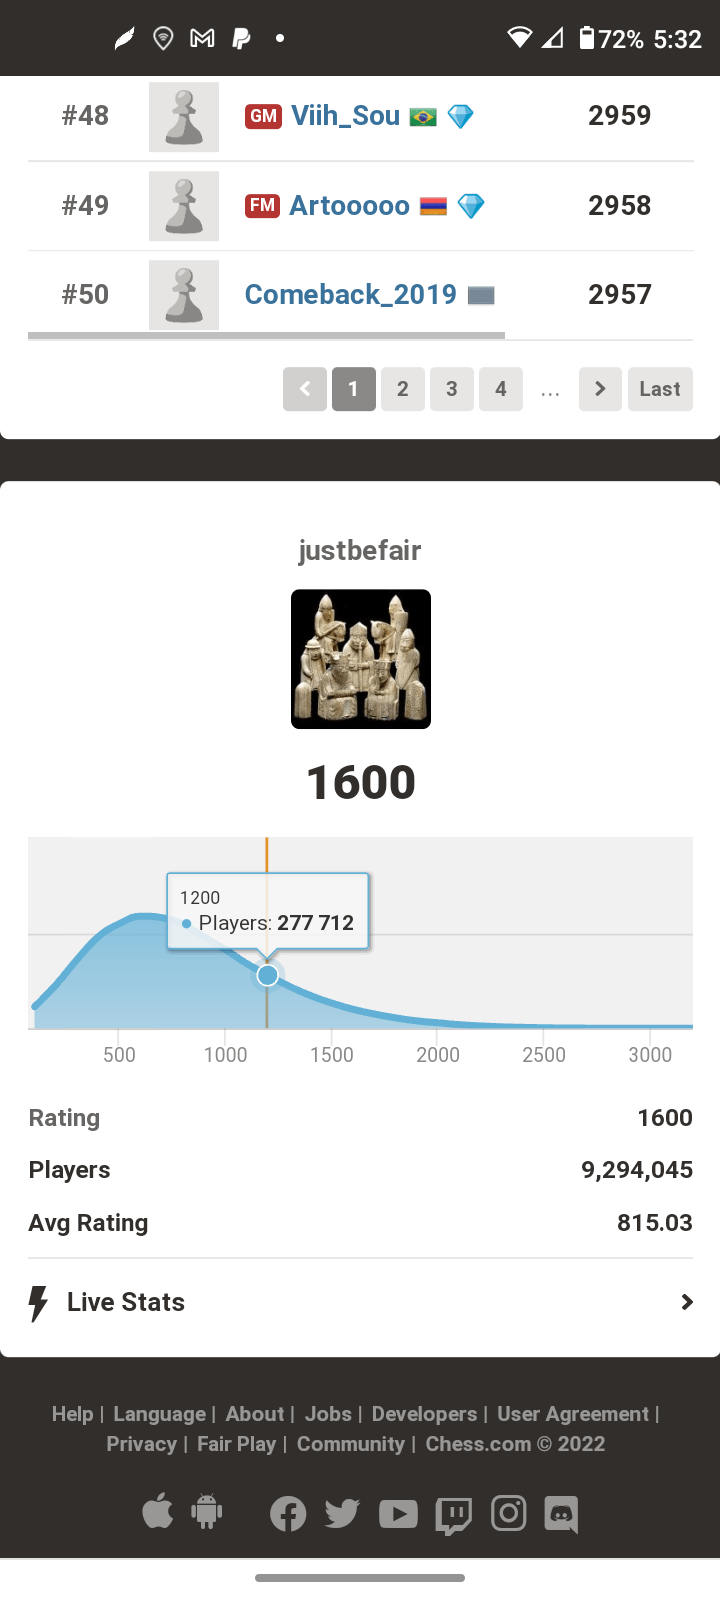 My chess.com blitz rating is around 1300 but on an online ELO